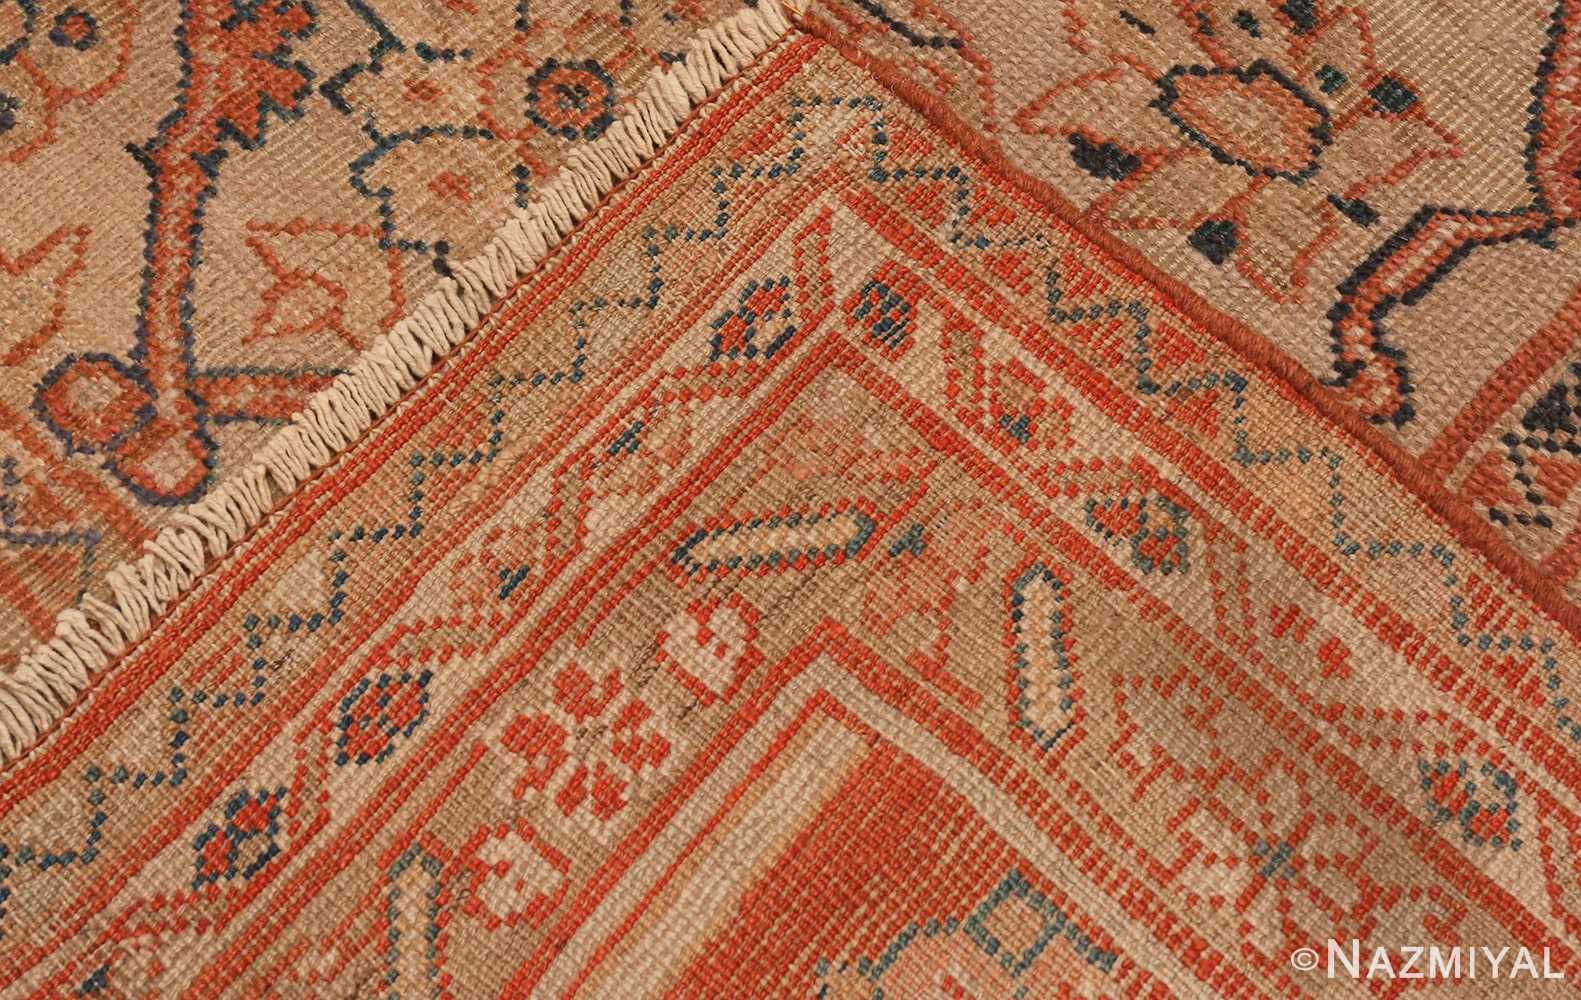 A picture of the weave of Antique Ivory Persian Sultanabad rug #50576 from Nazmiyal Antique Rugs in NYC